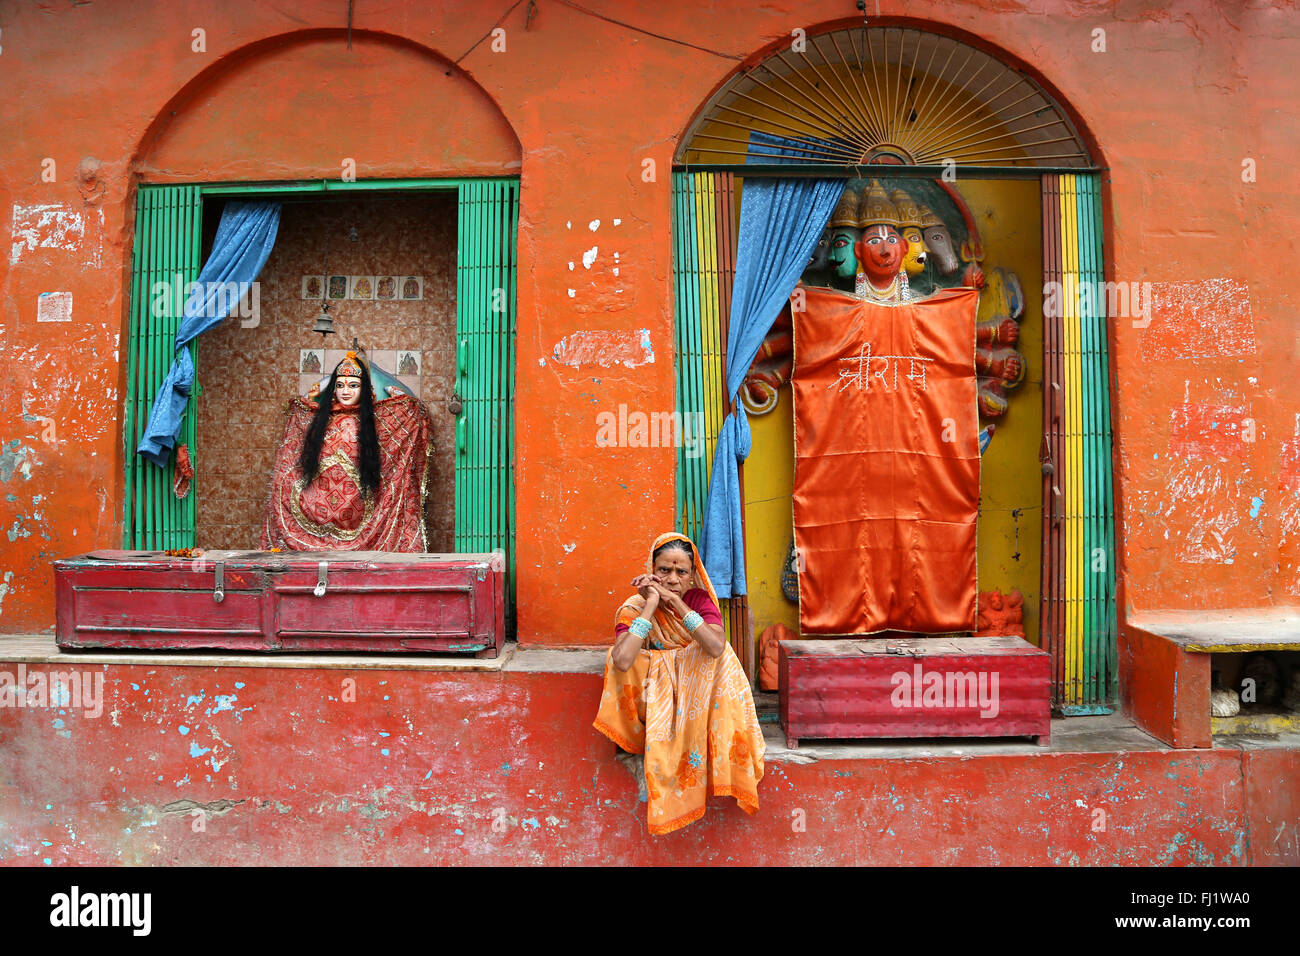 Indian woman sitting in front of a temple on Dashashwamedh Ghat, Varanasi, India Stock Photo